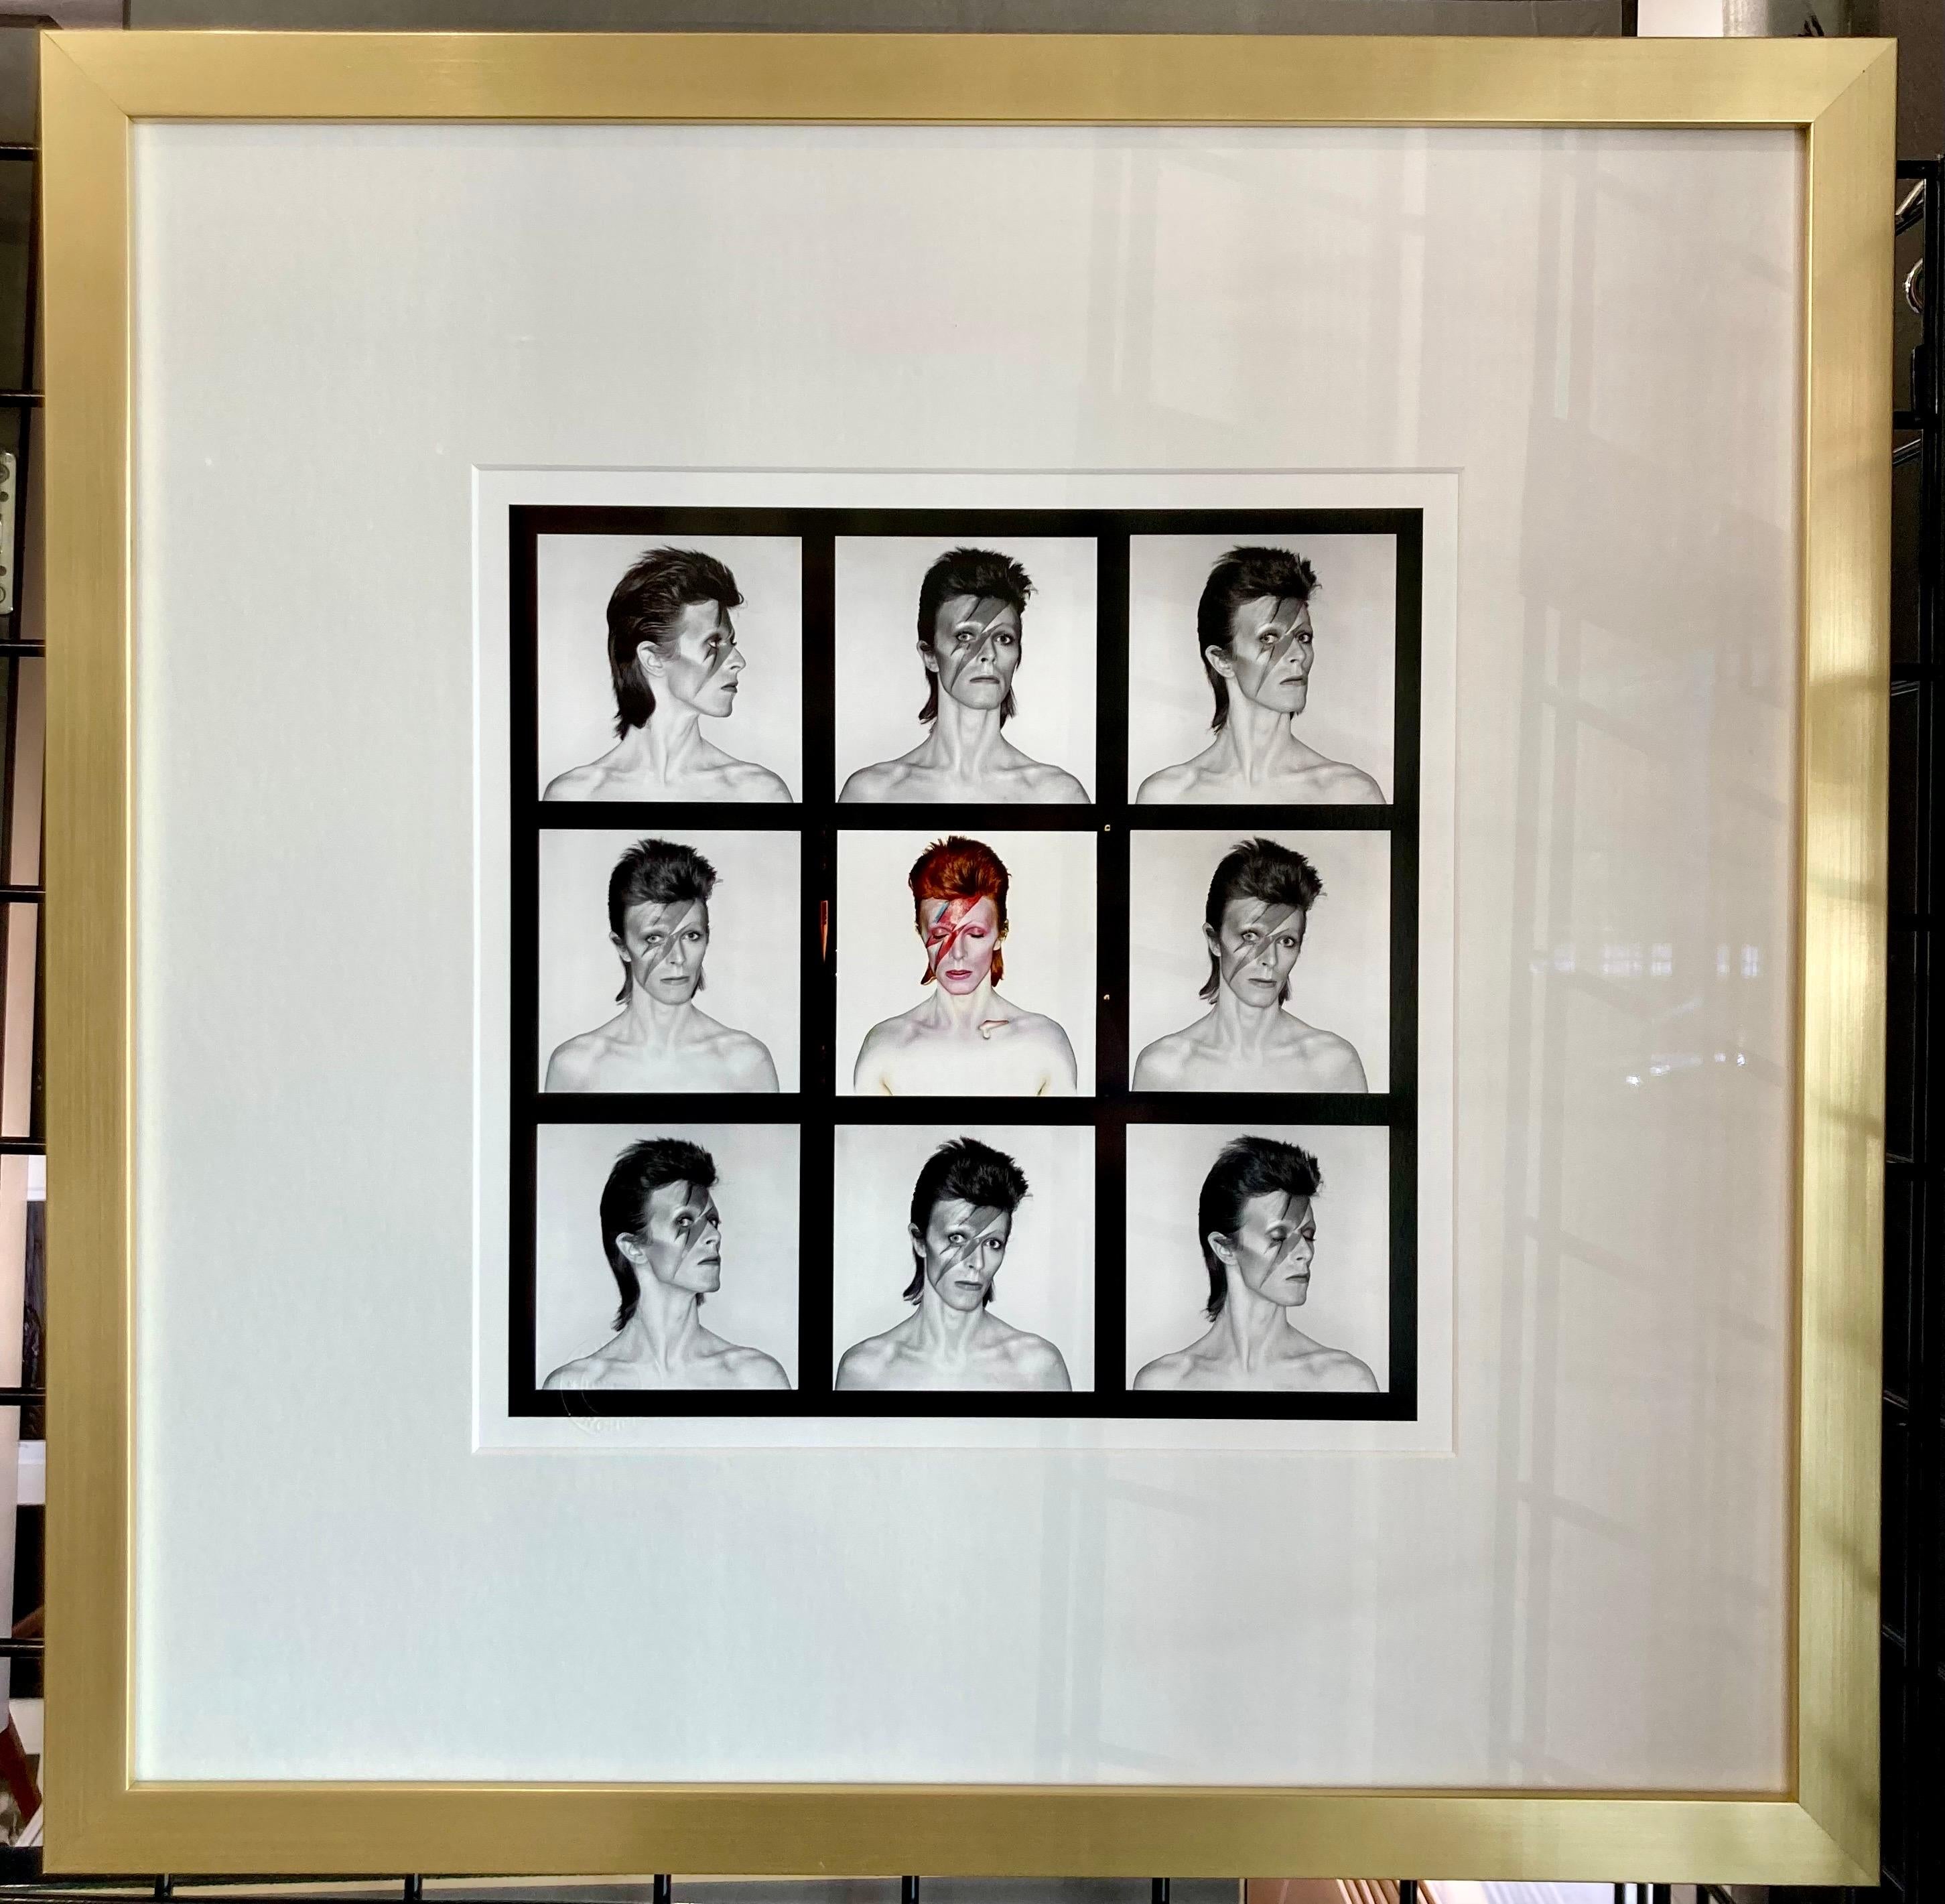 David Bowie Aladdin Sane contact sheet by Brian Duffy with gold frame